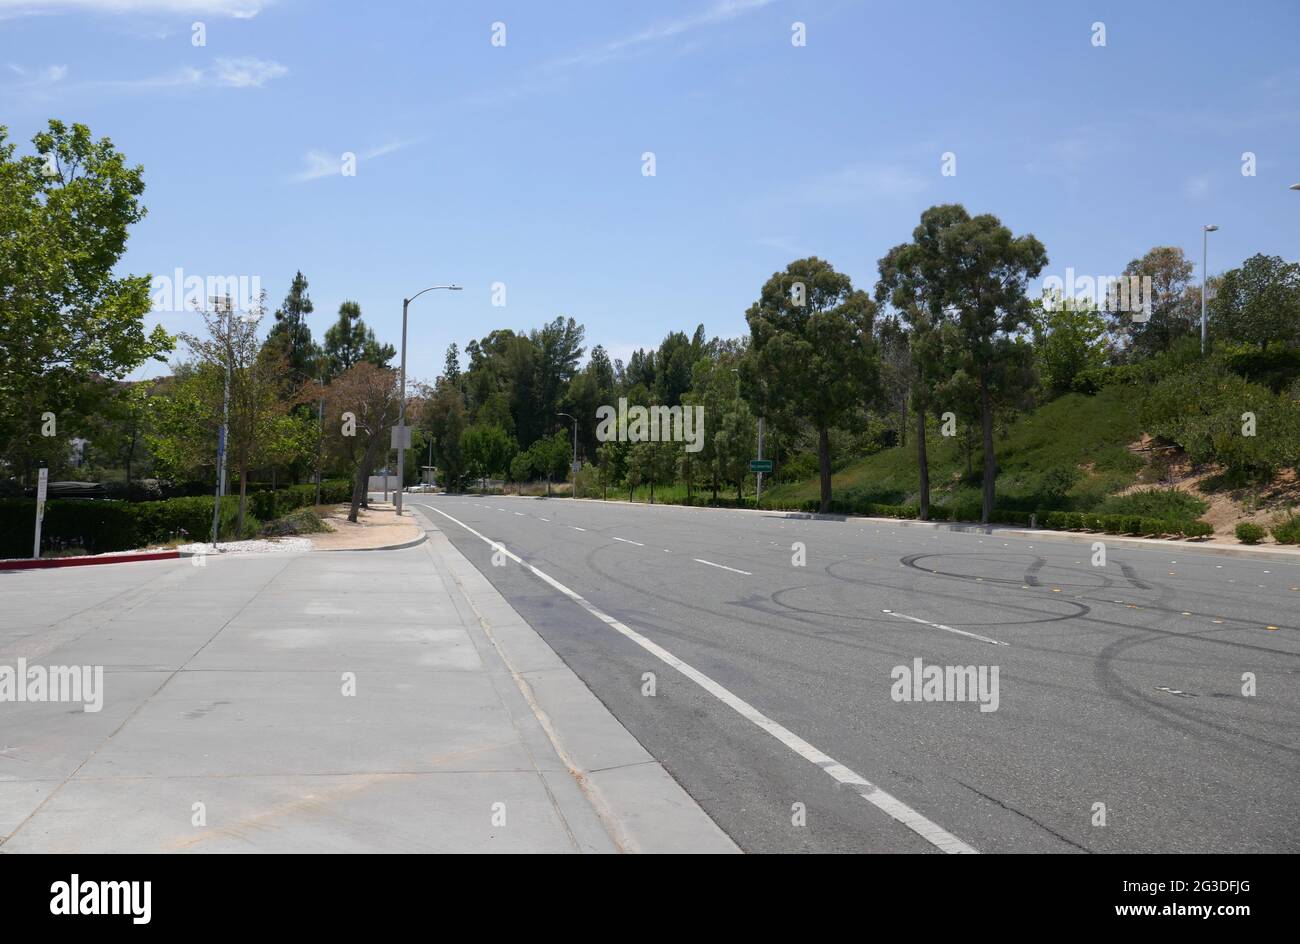 Valencia, California, USA 15th June 2021 A general view of atmosphere of actor Paul Walker's Fatal Car Crash Location at 28385 Constellation Road where Roger Rodas was driving with Paul Walker on November 30, 2013 and they crashed here in Valencia, California, USA. Photo by Barry King/Alamy Stock Photo Stock Photo